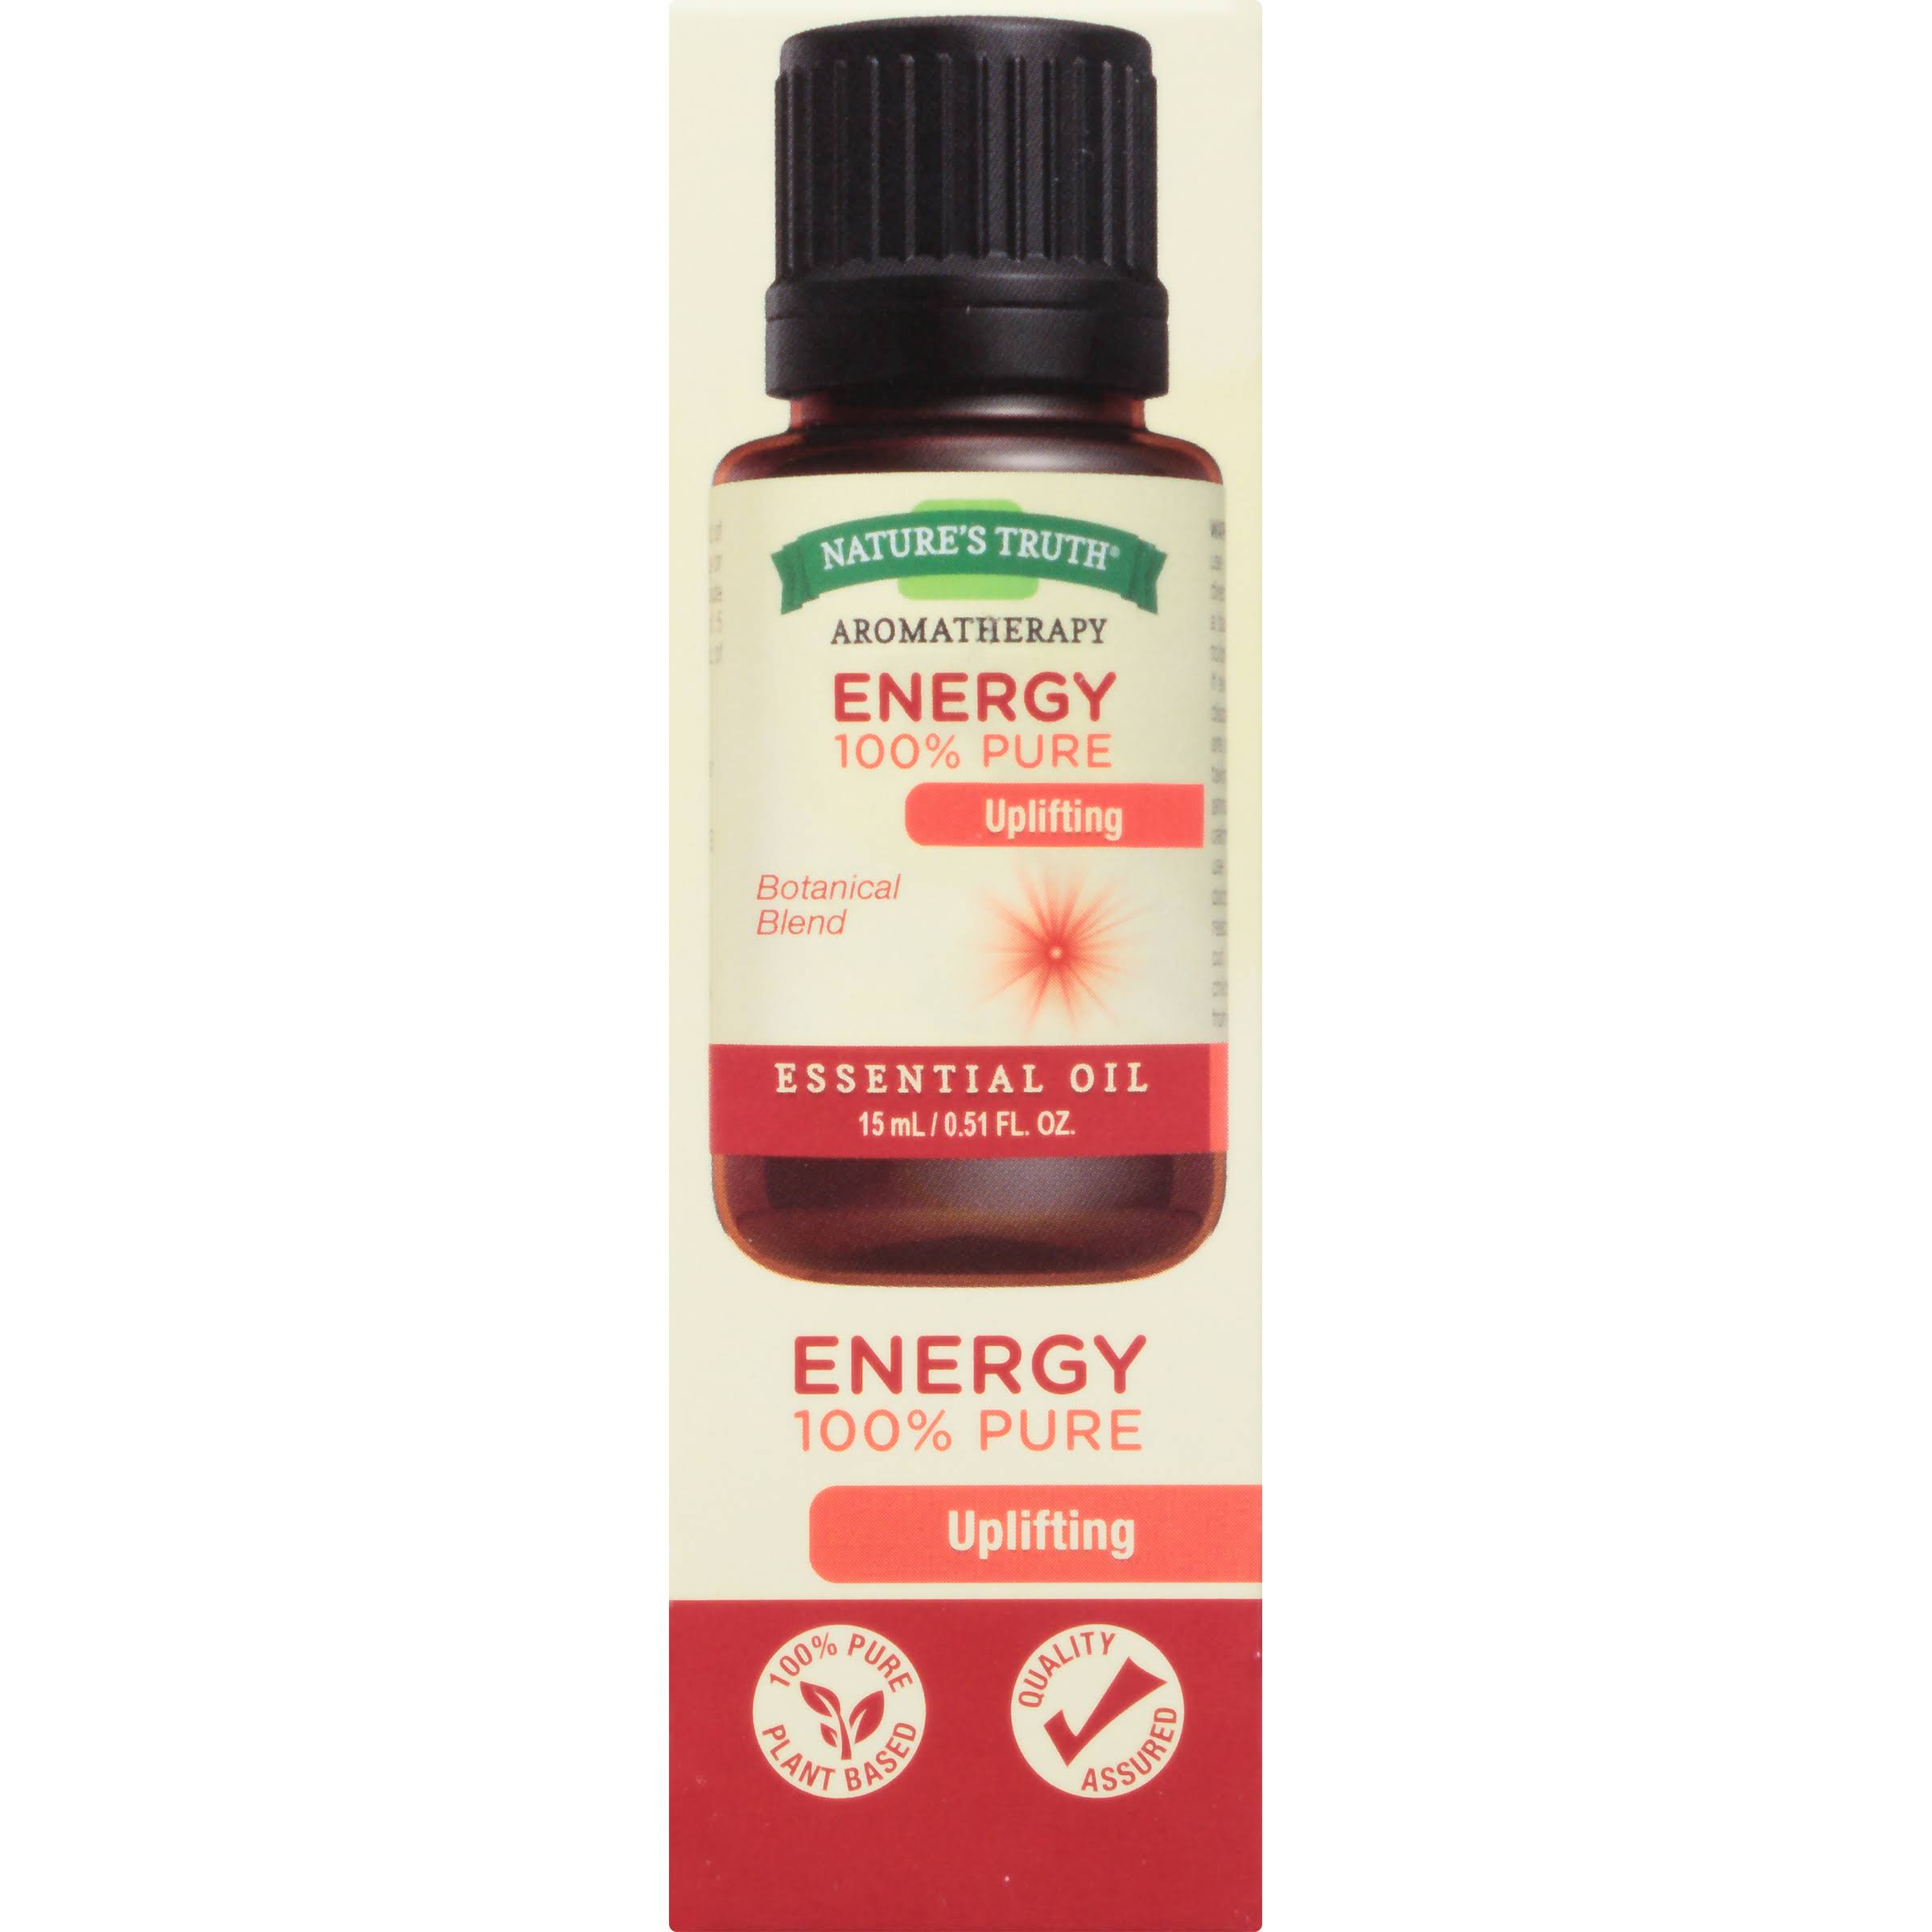 Nature's Truth Aromatherapy Uplifting Botanical Blend Essential Oil - 15ml